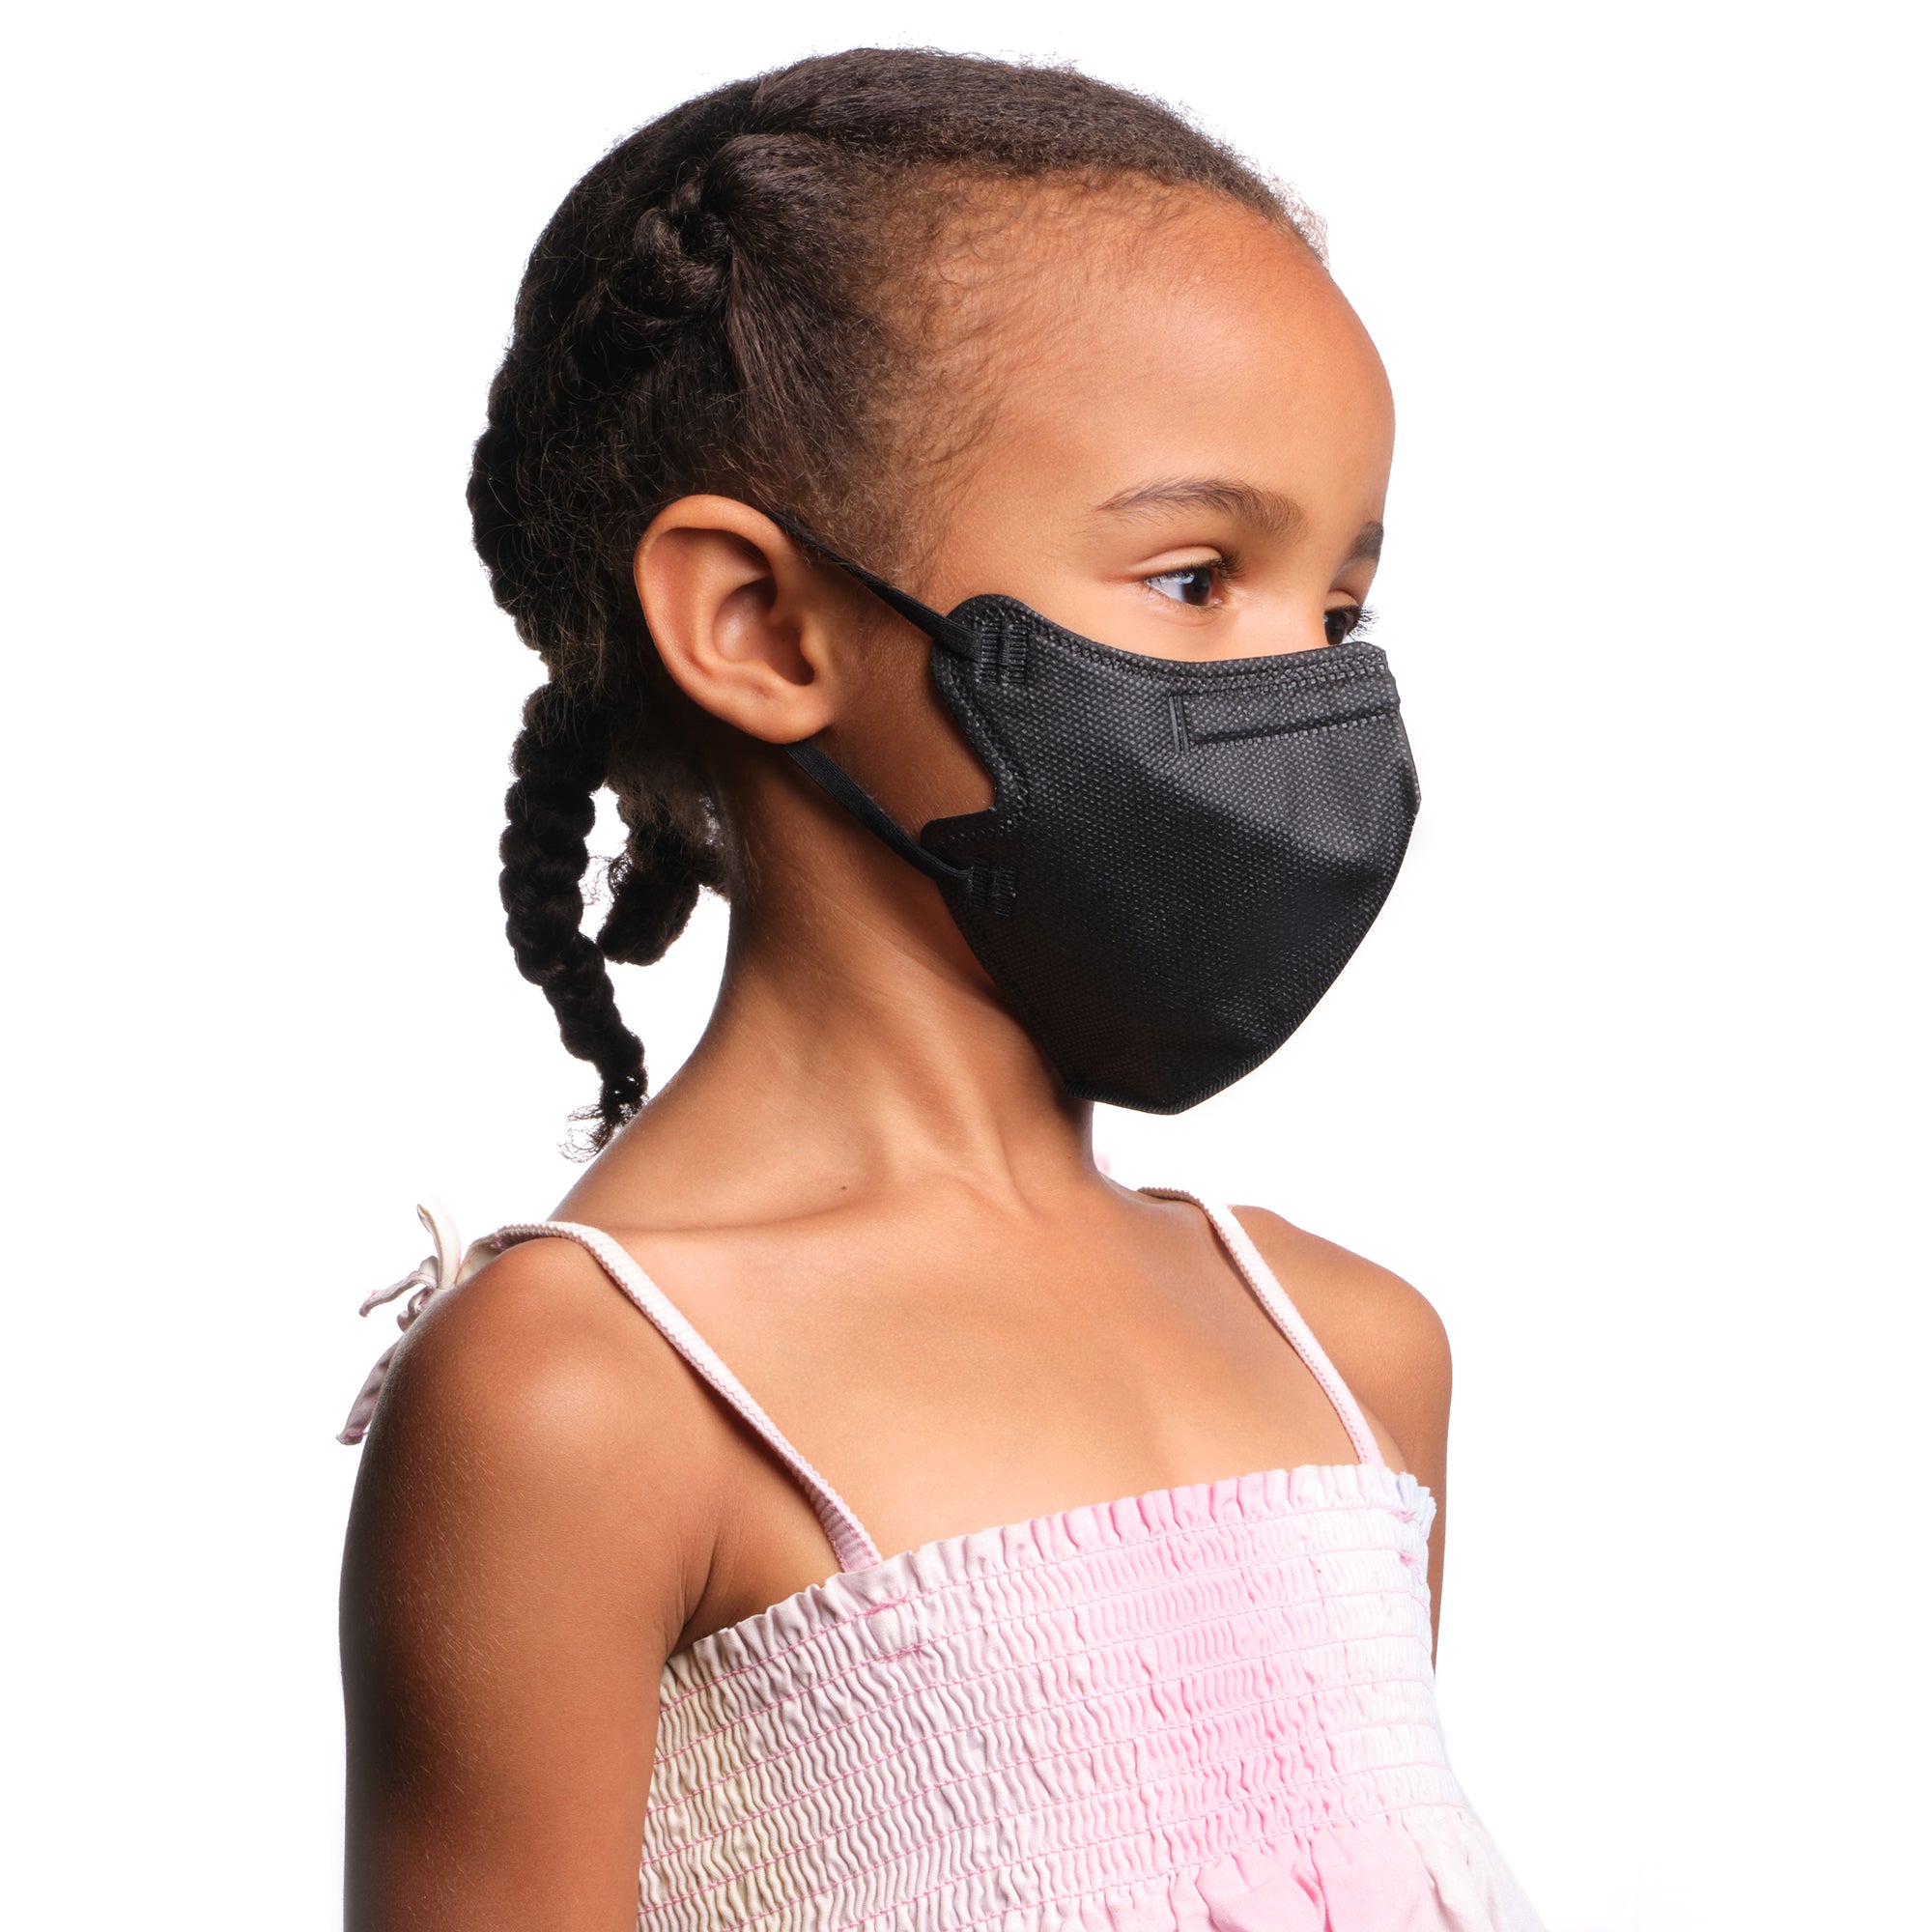 Kid's Black White KN95 Protective Best Face Mask Individually Sealed PPE Supply